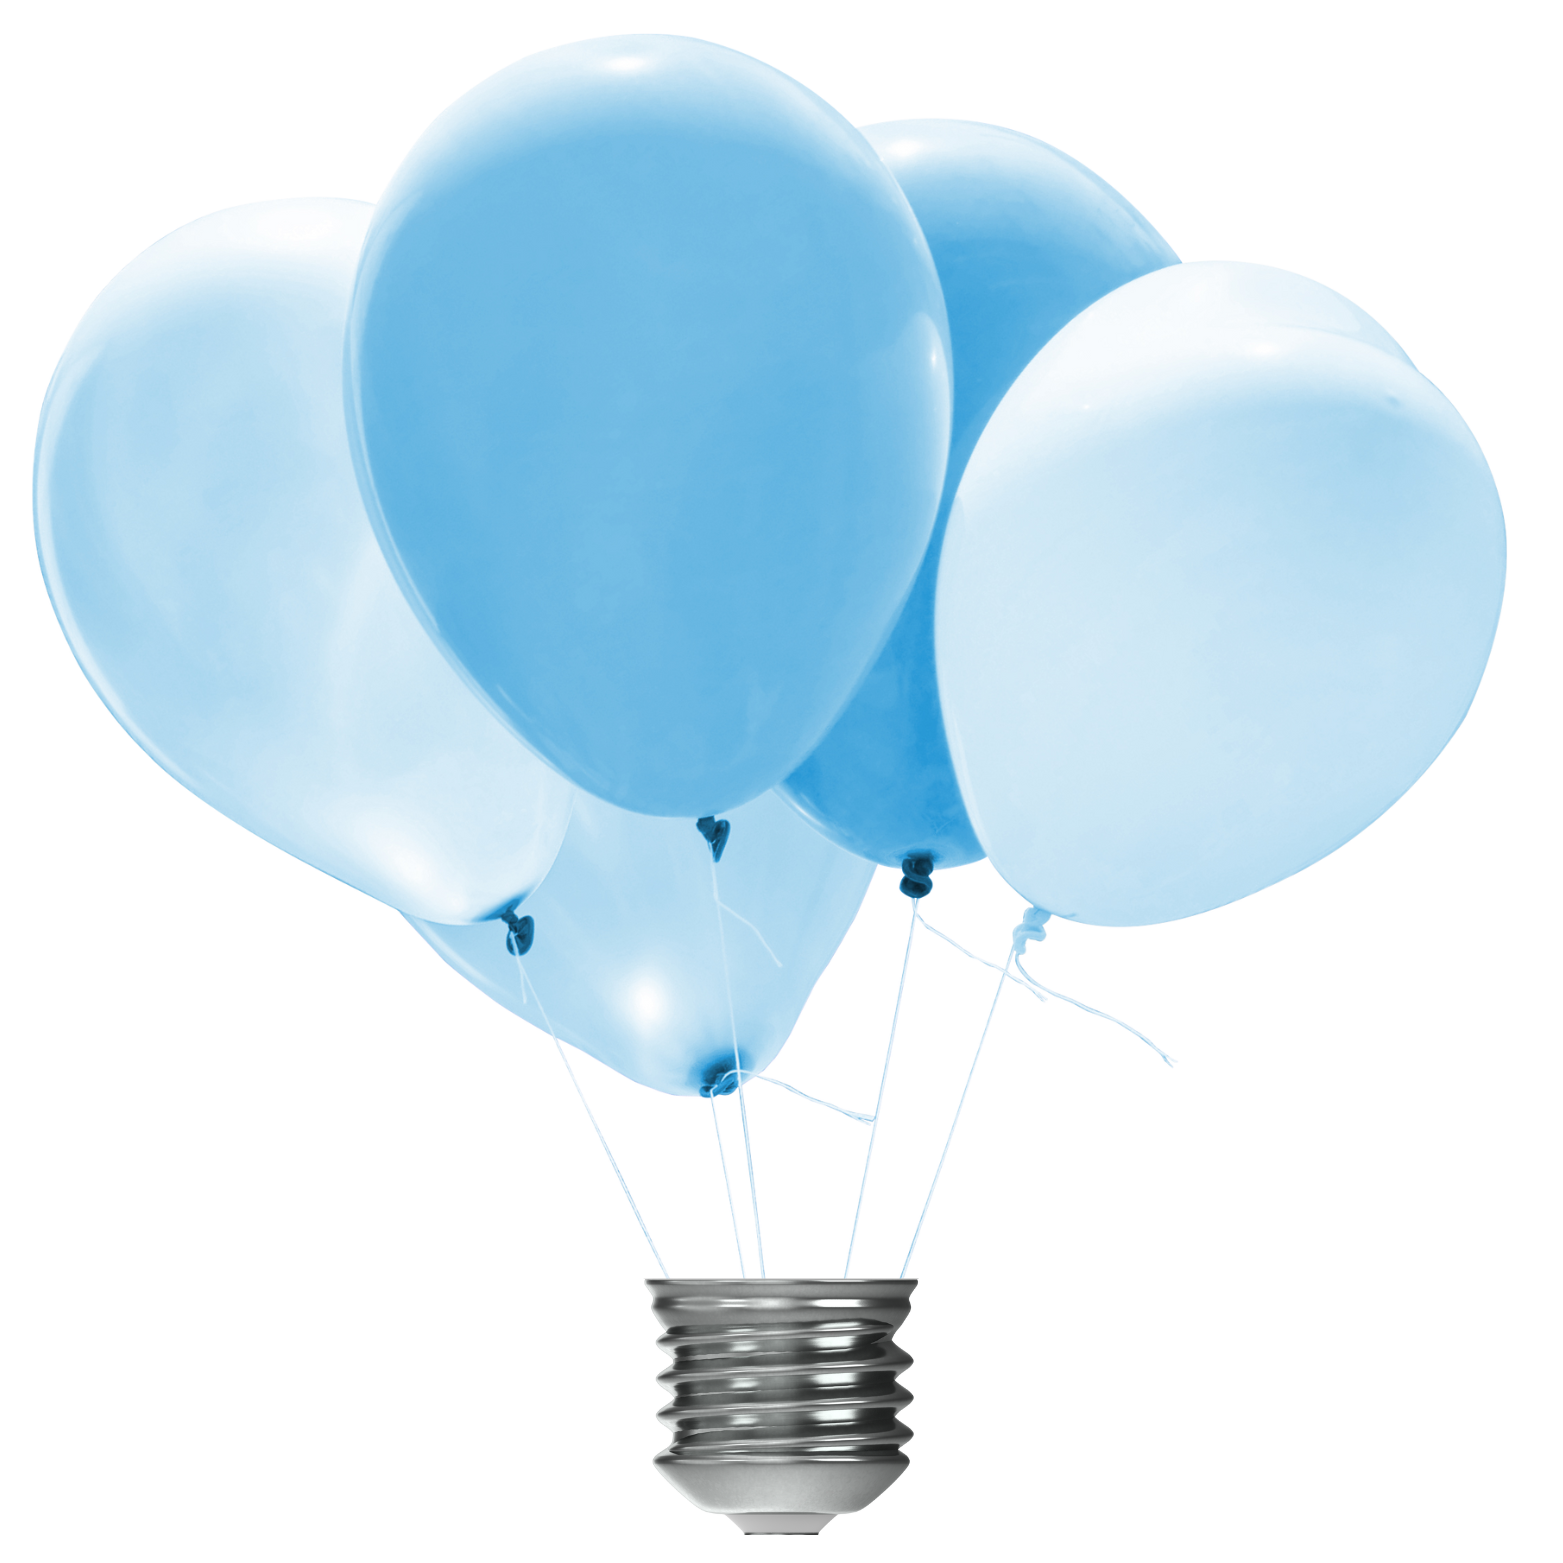 balloons with light bulb base